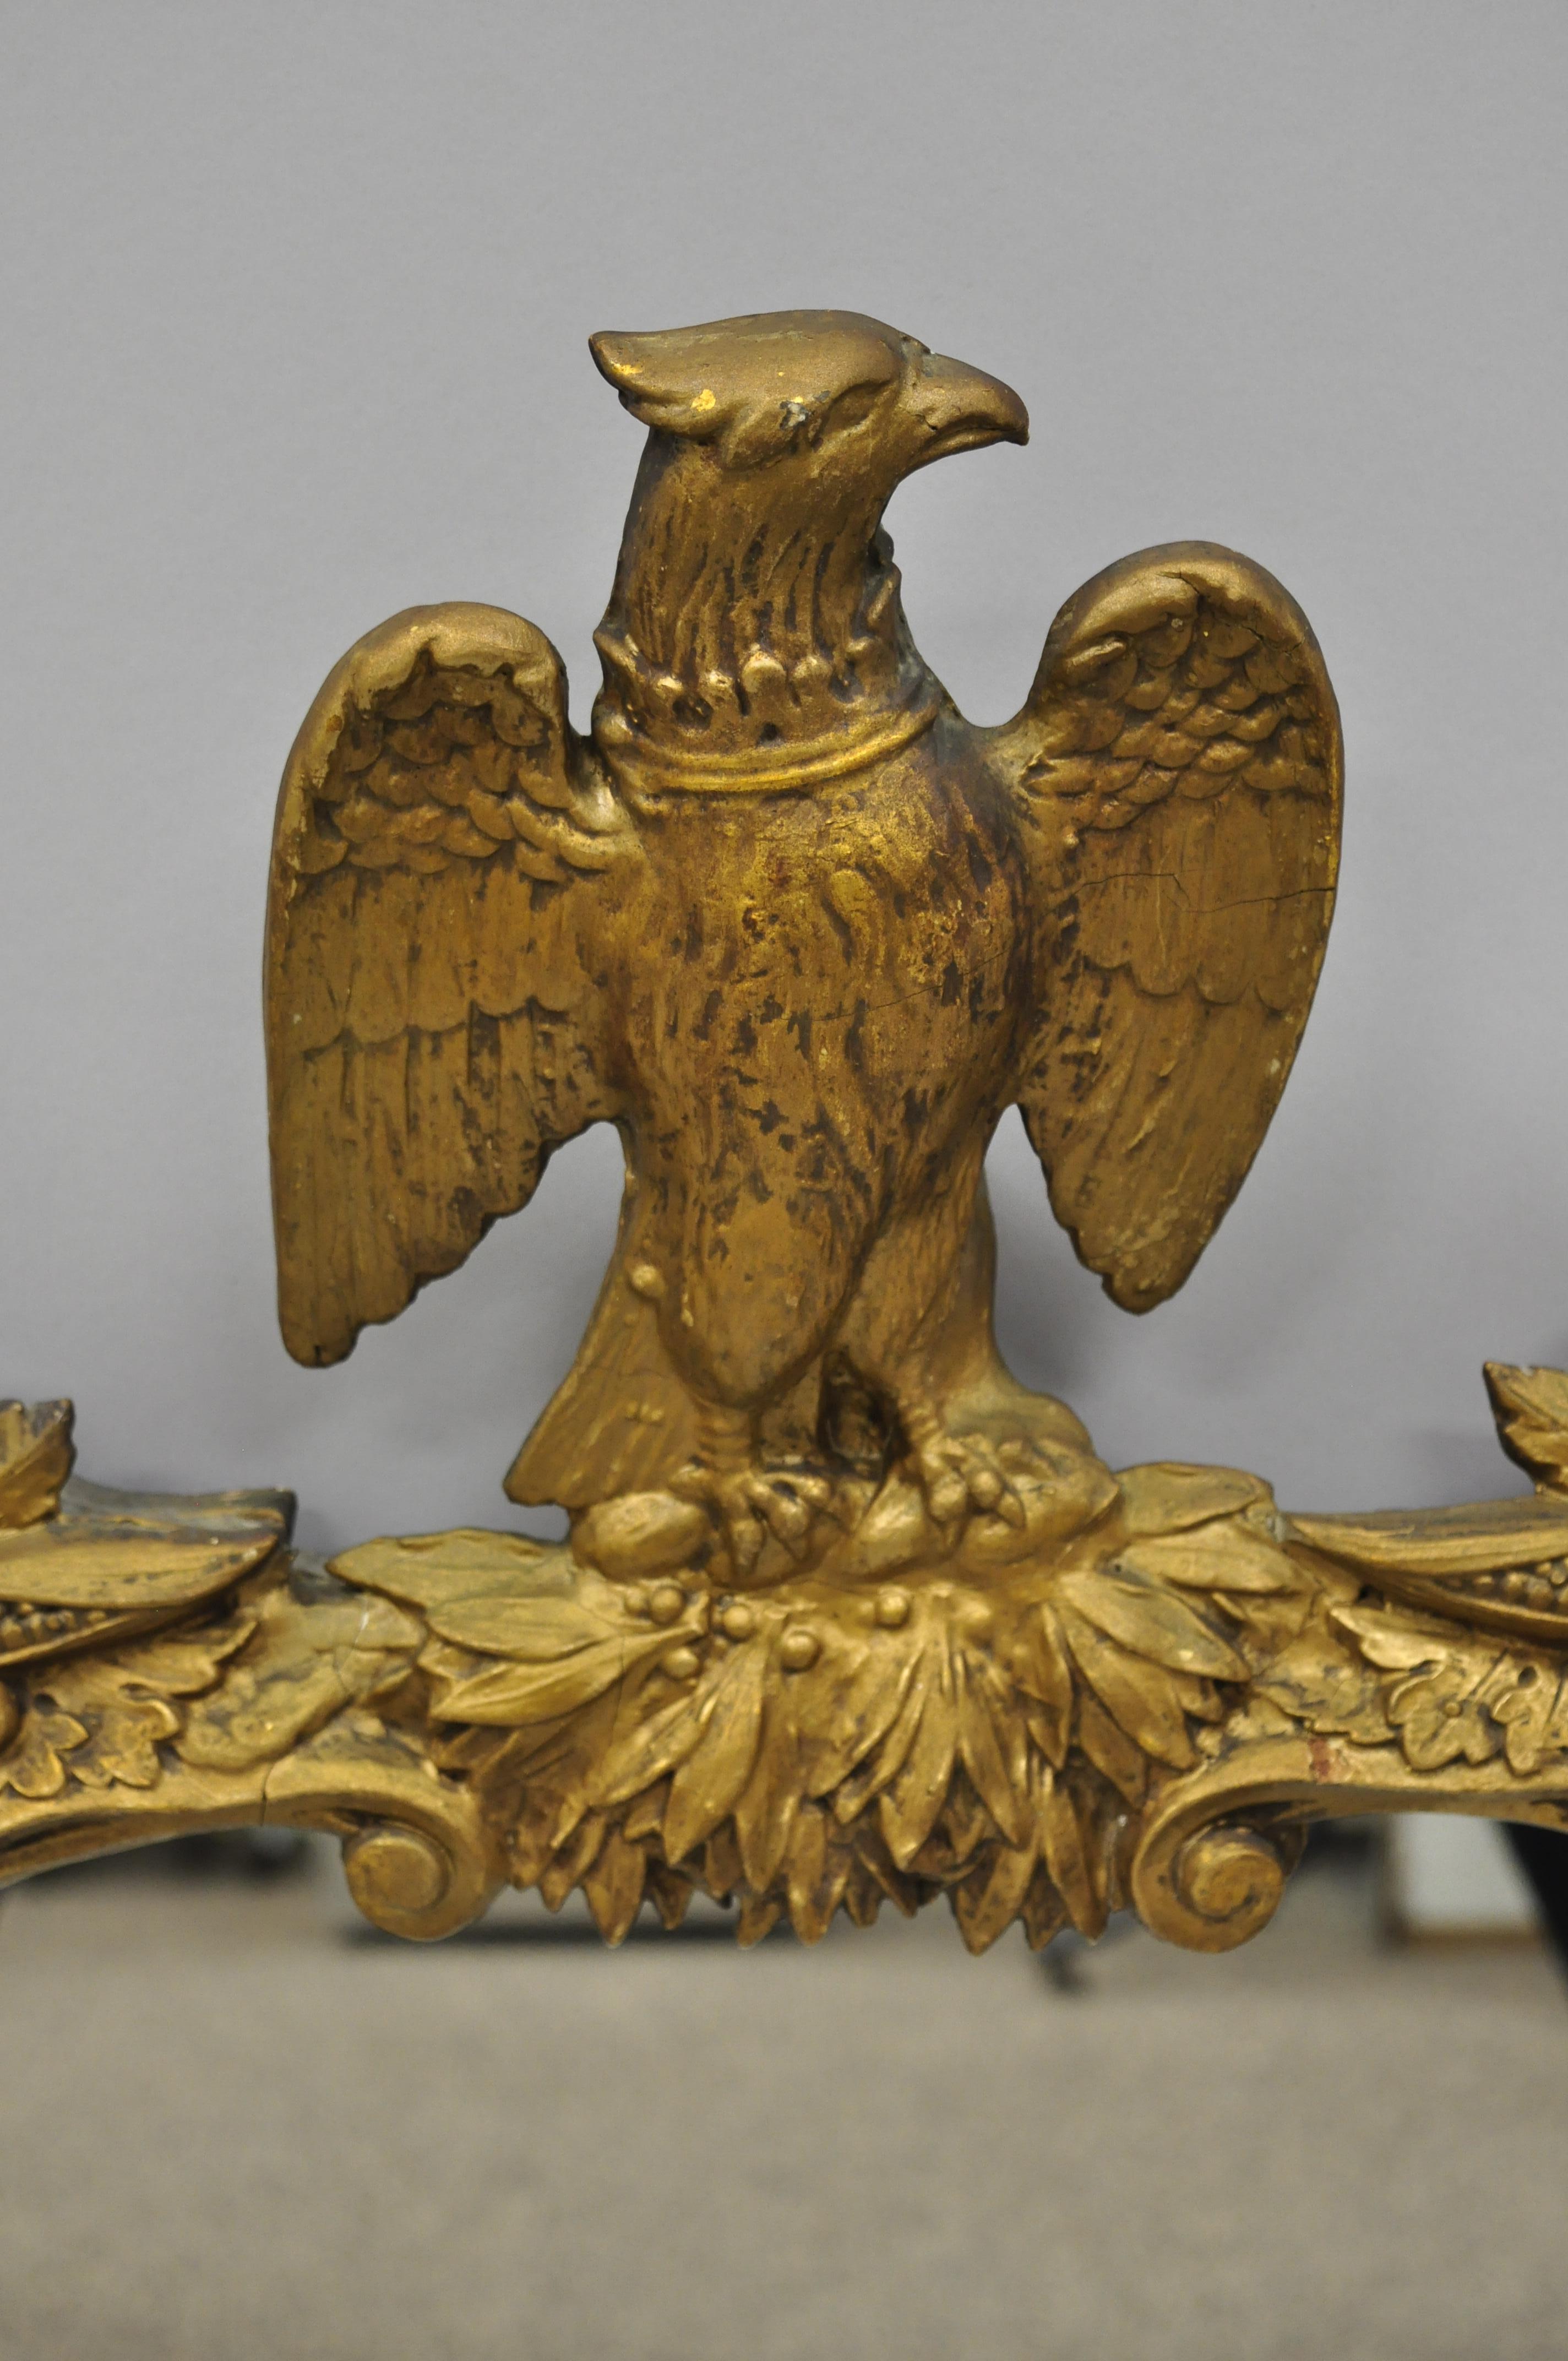 the mirror in ungonachomma the eagle seeks out beauty symbolizes